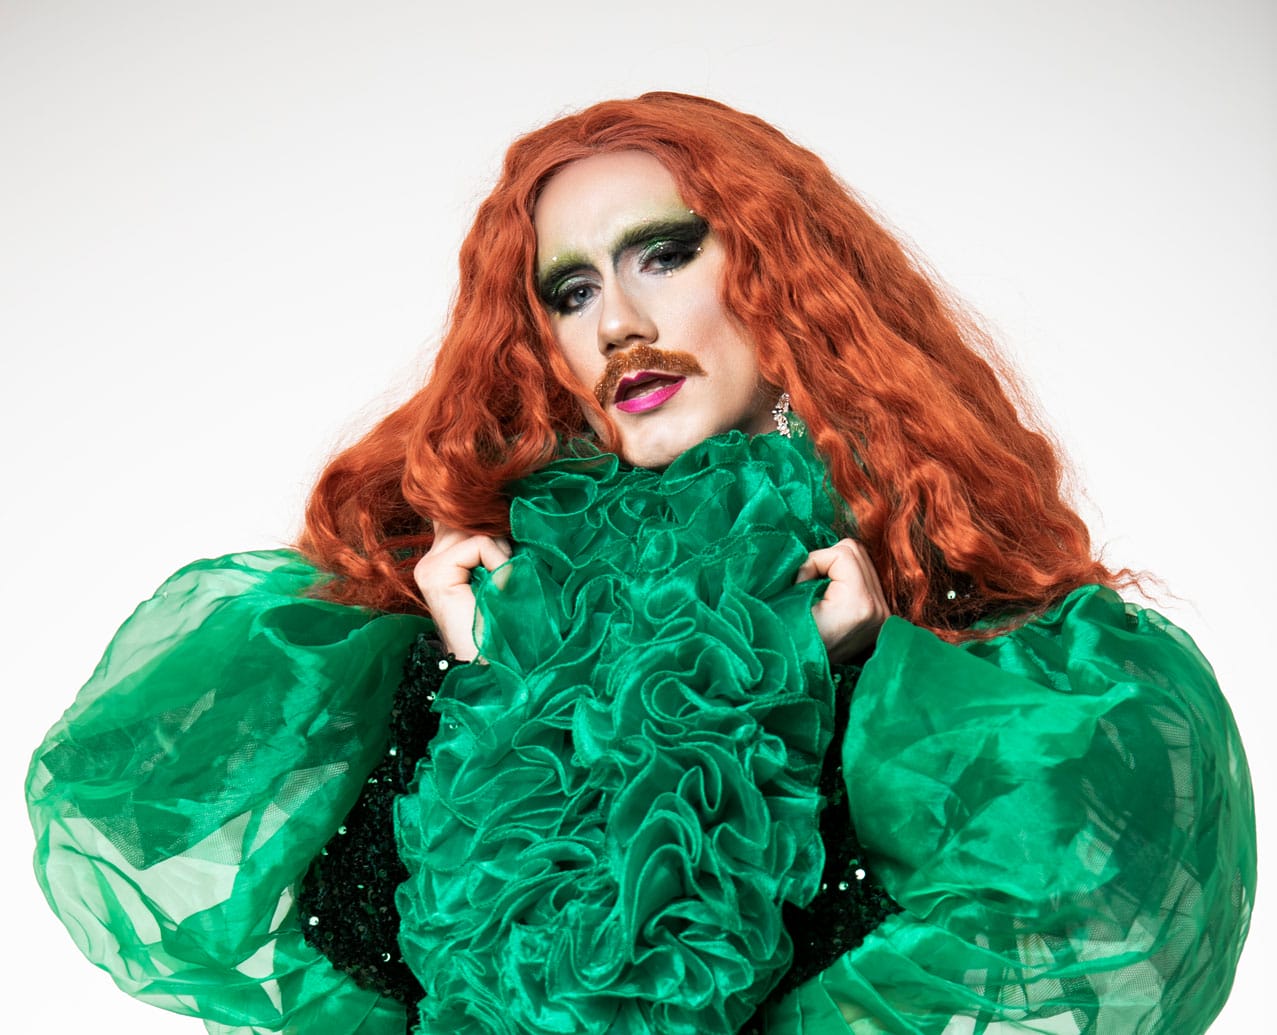 Carrot, a drag artist with long red hair is looking straight at the camera, they are wearing a green outfit with a lot of ruffles around the neck and down the front and large puffed sleeves.